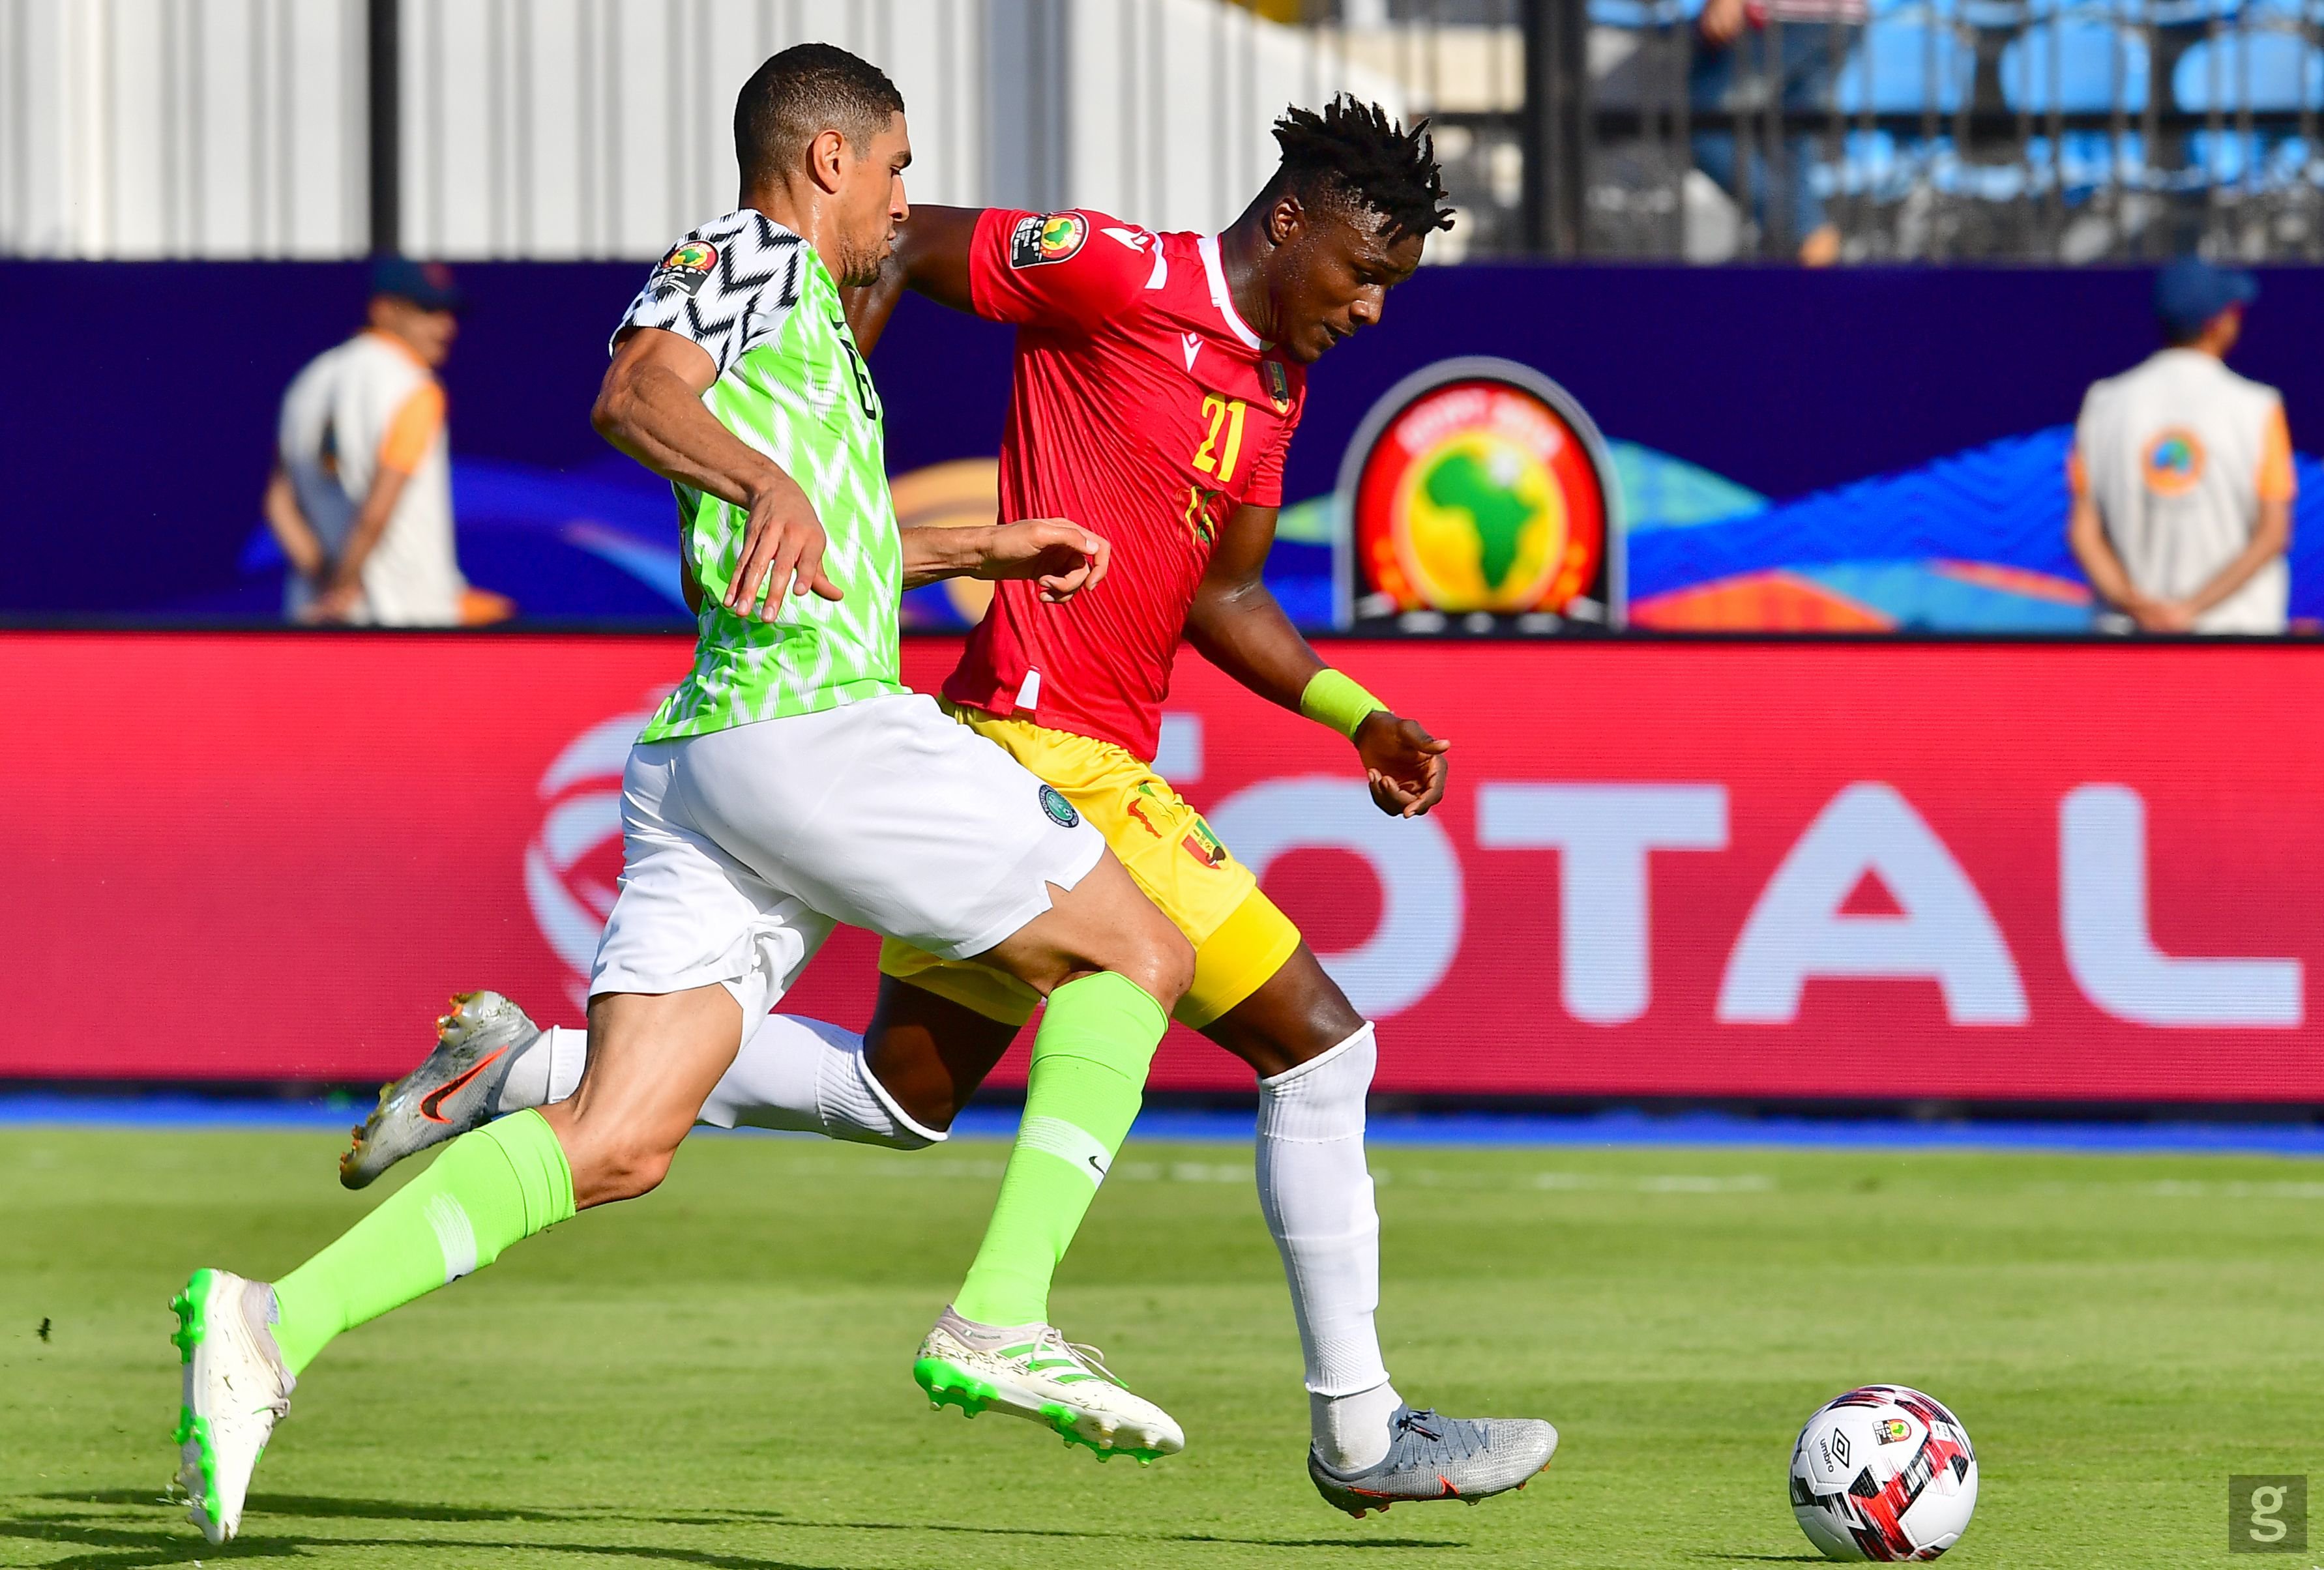 Leon Balogun played well in defence that kept a clean sheet  (Getty Images)